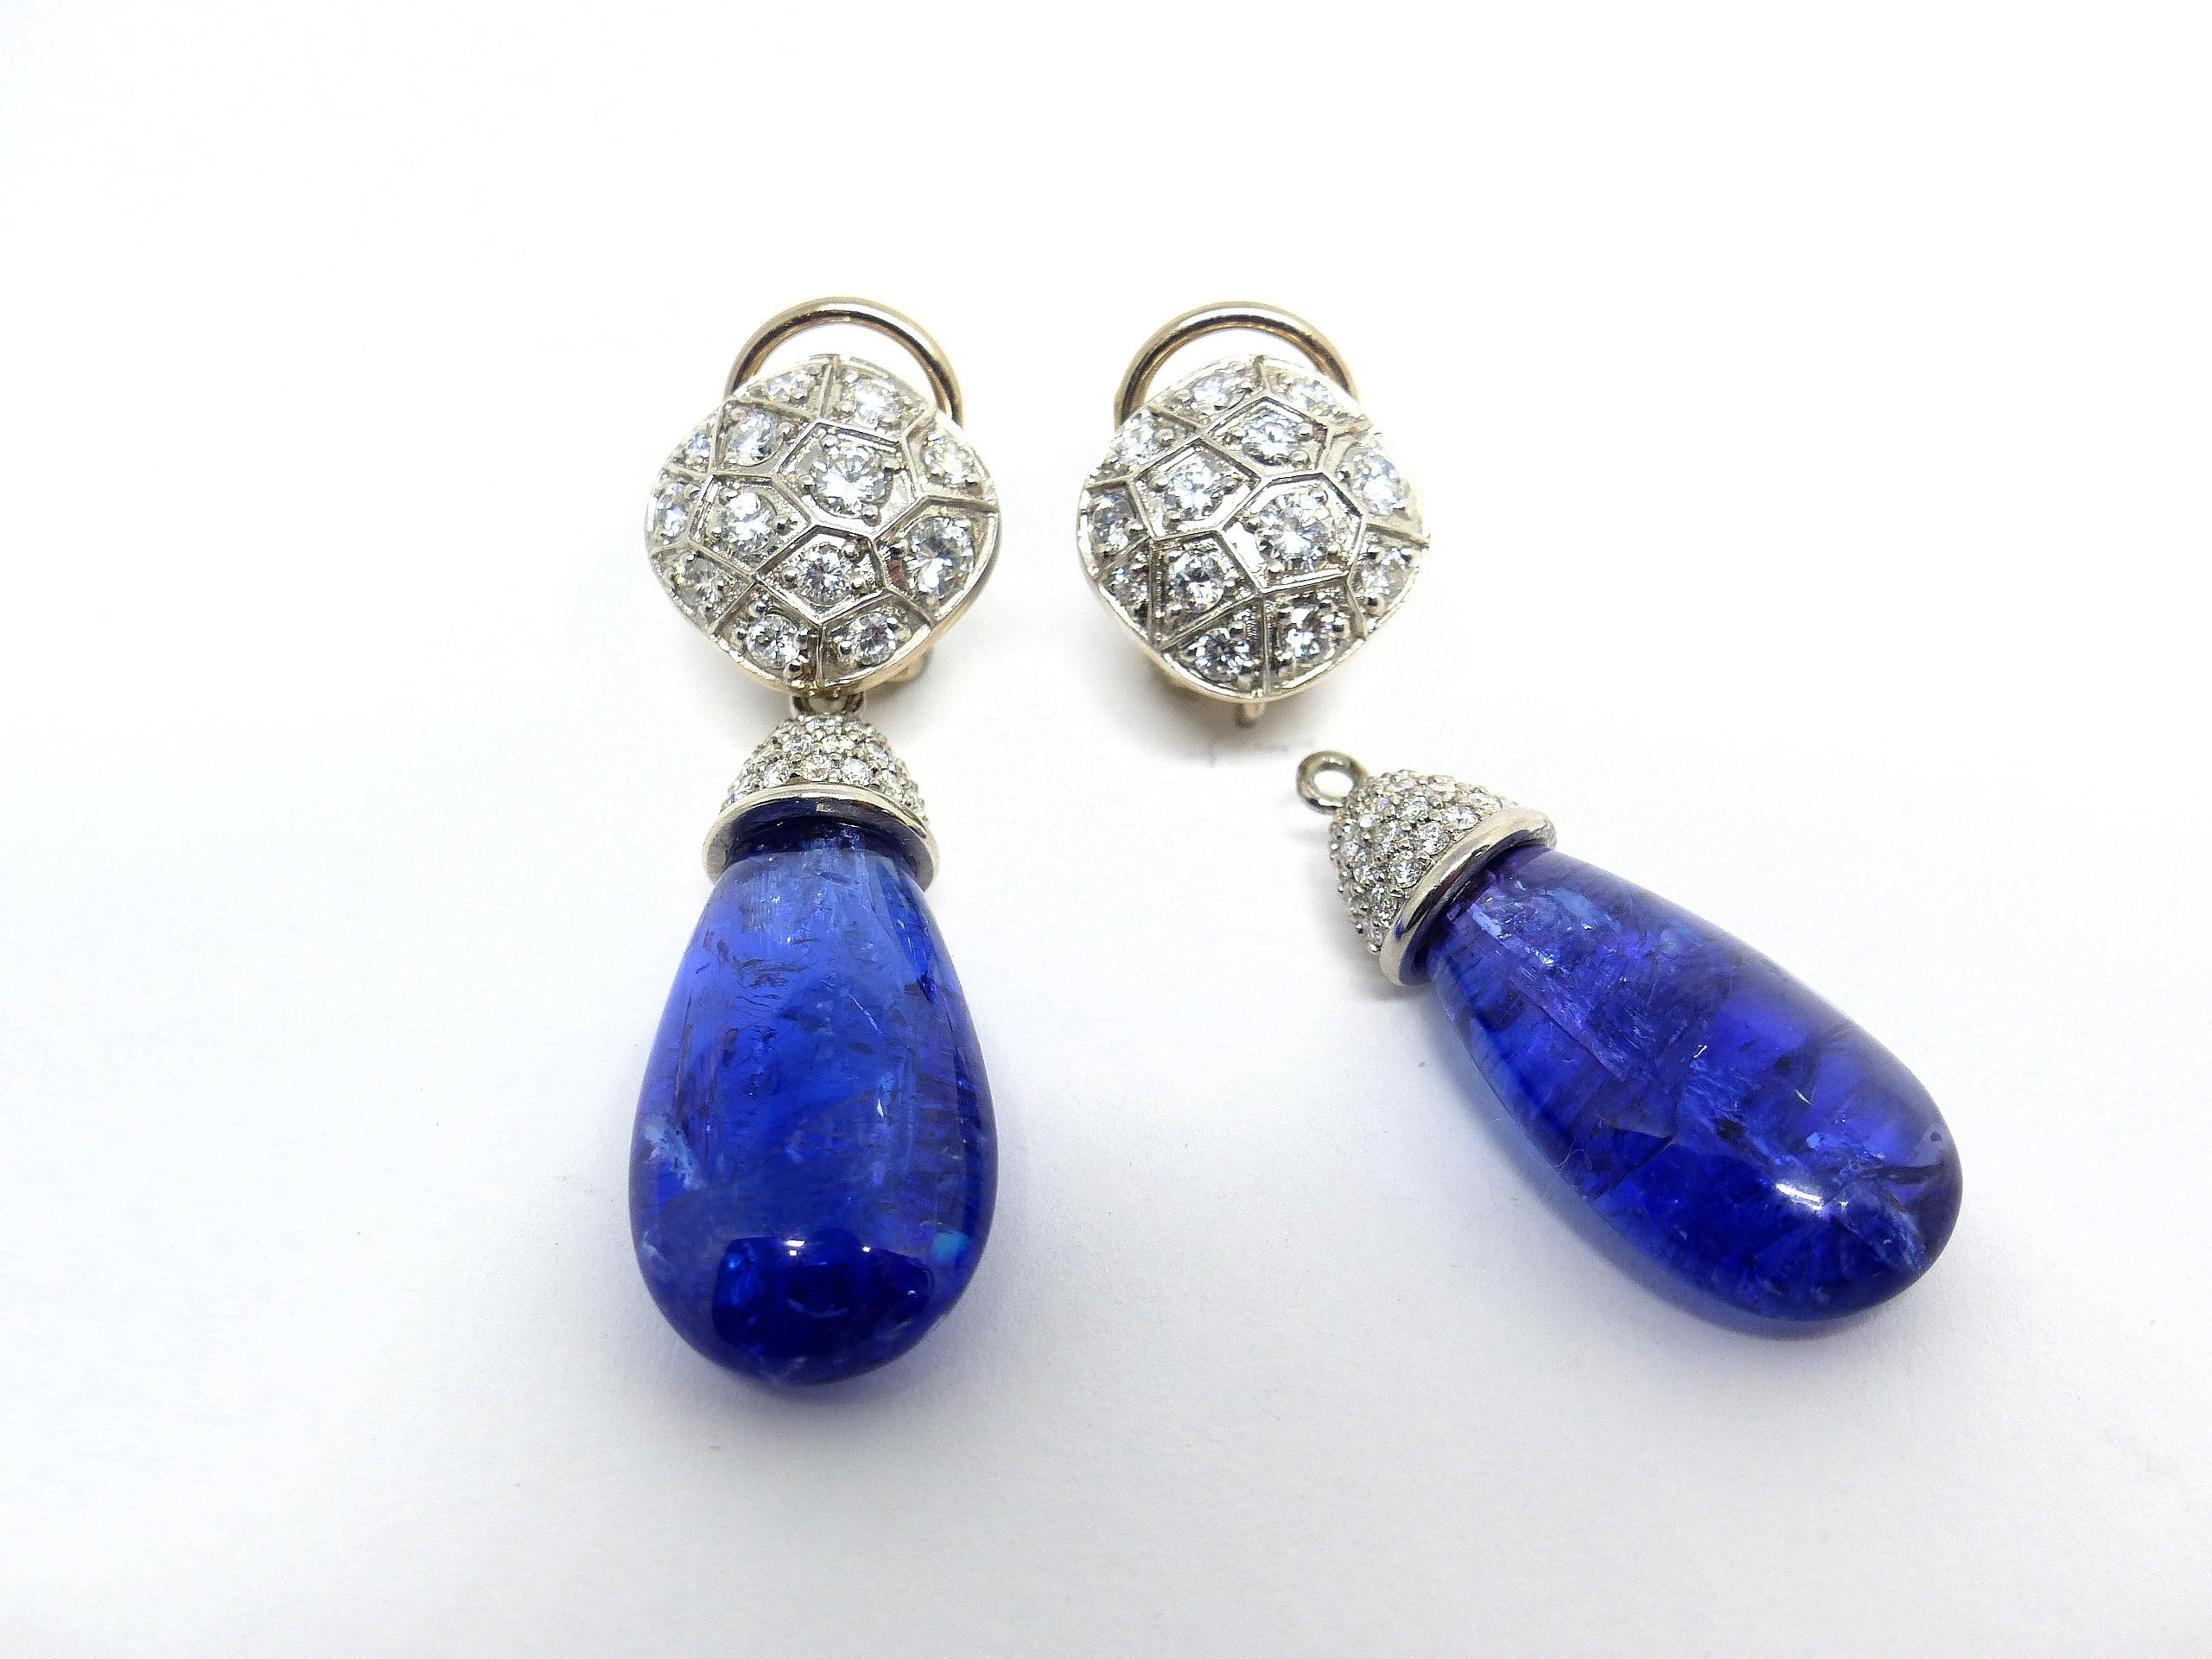 Briolette Cut Earrings in White Gold with 2 Tanzanite Brioletts 41, 11ct. and Diamonds. For Sale